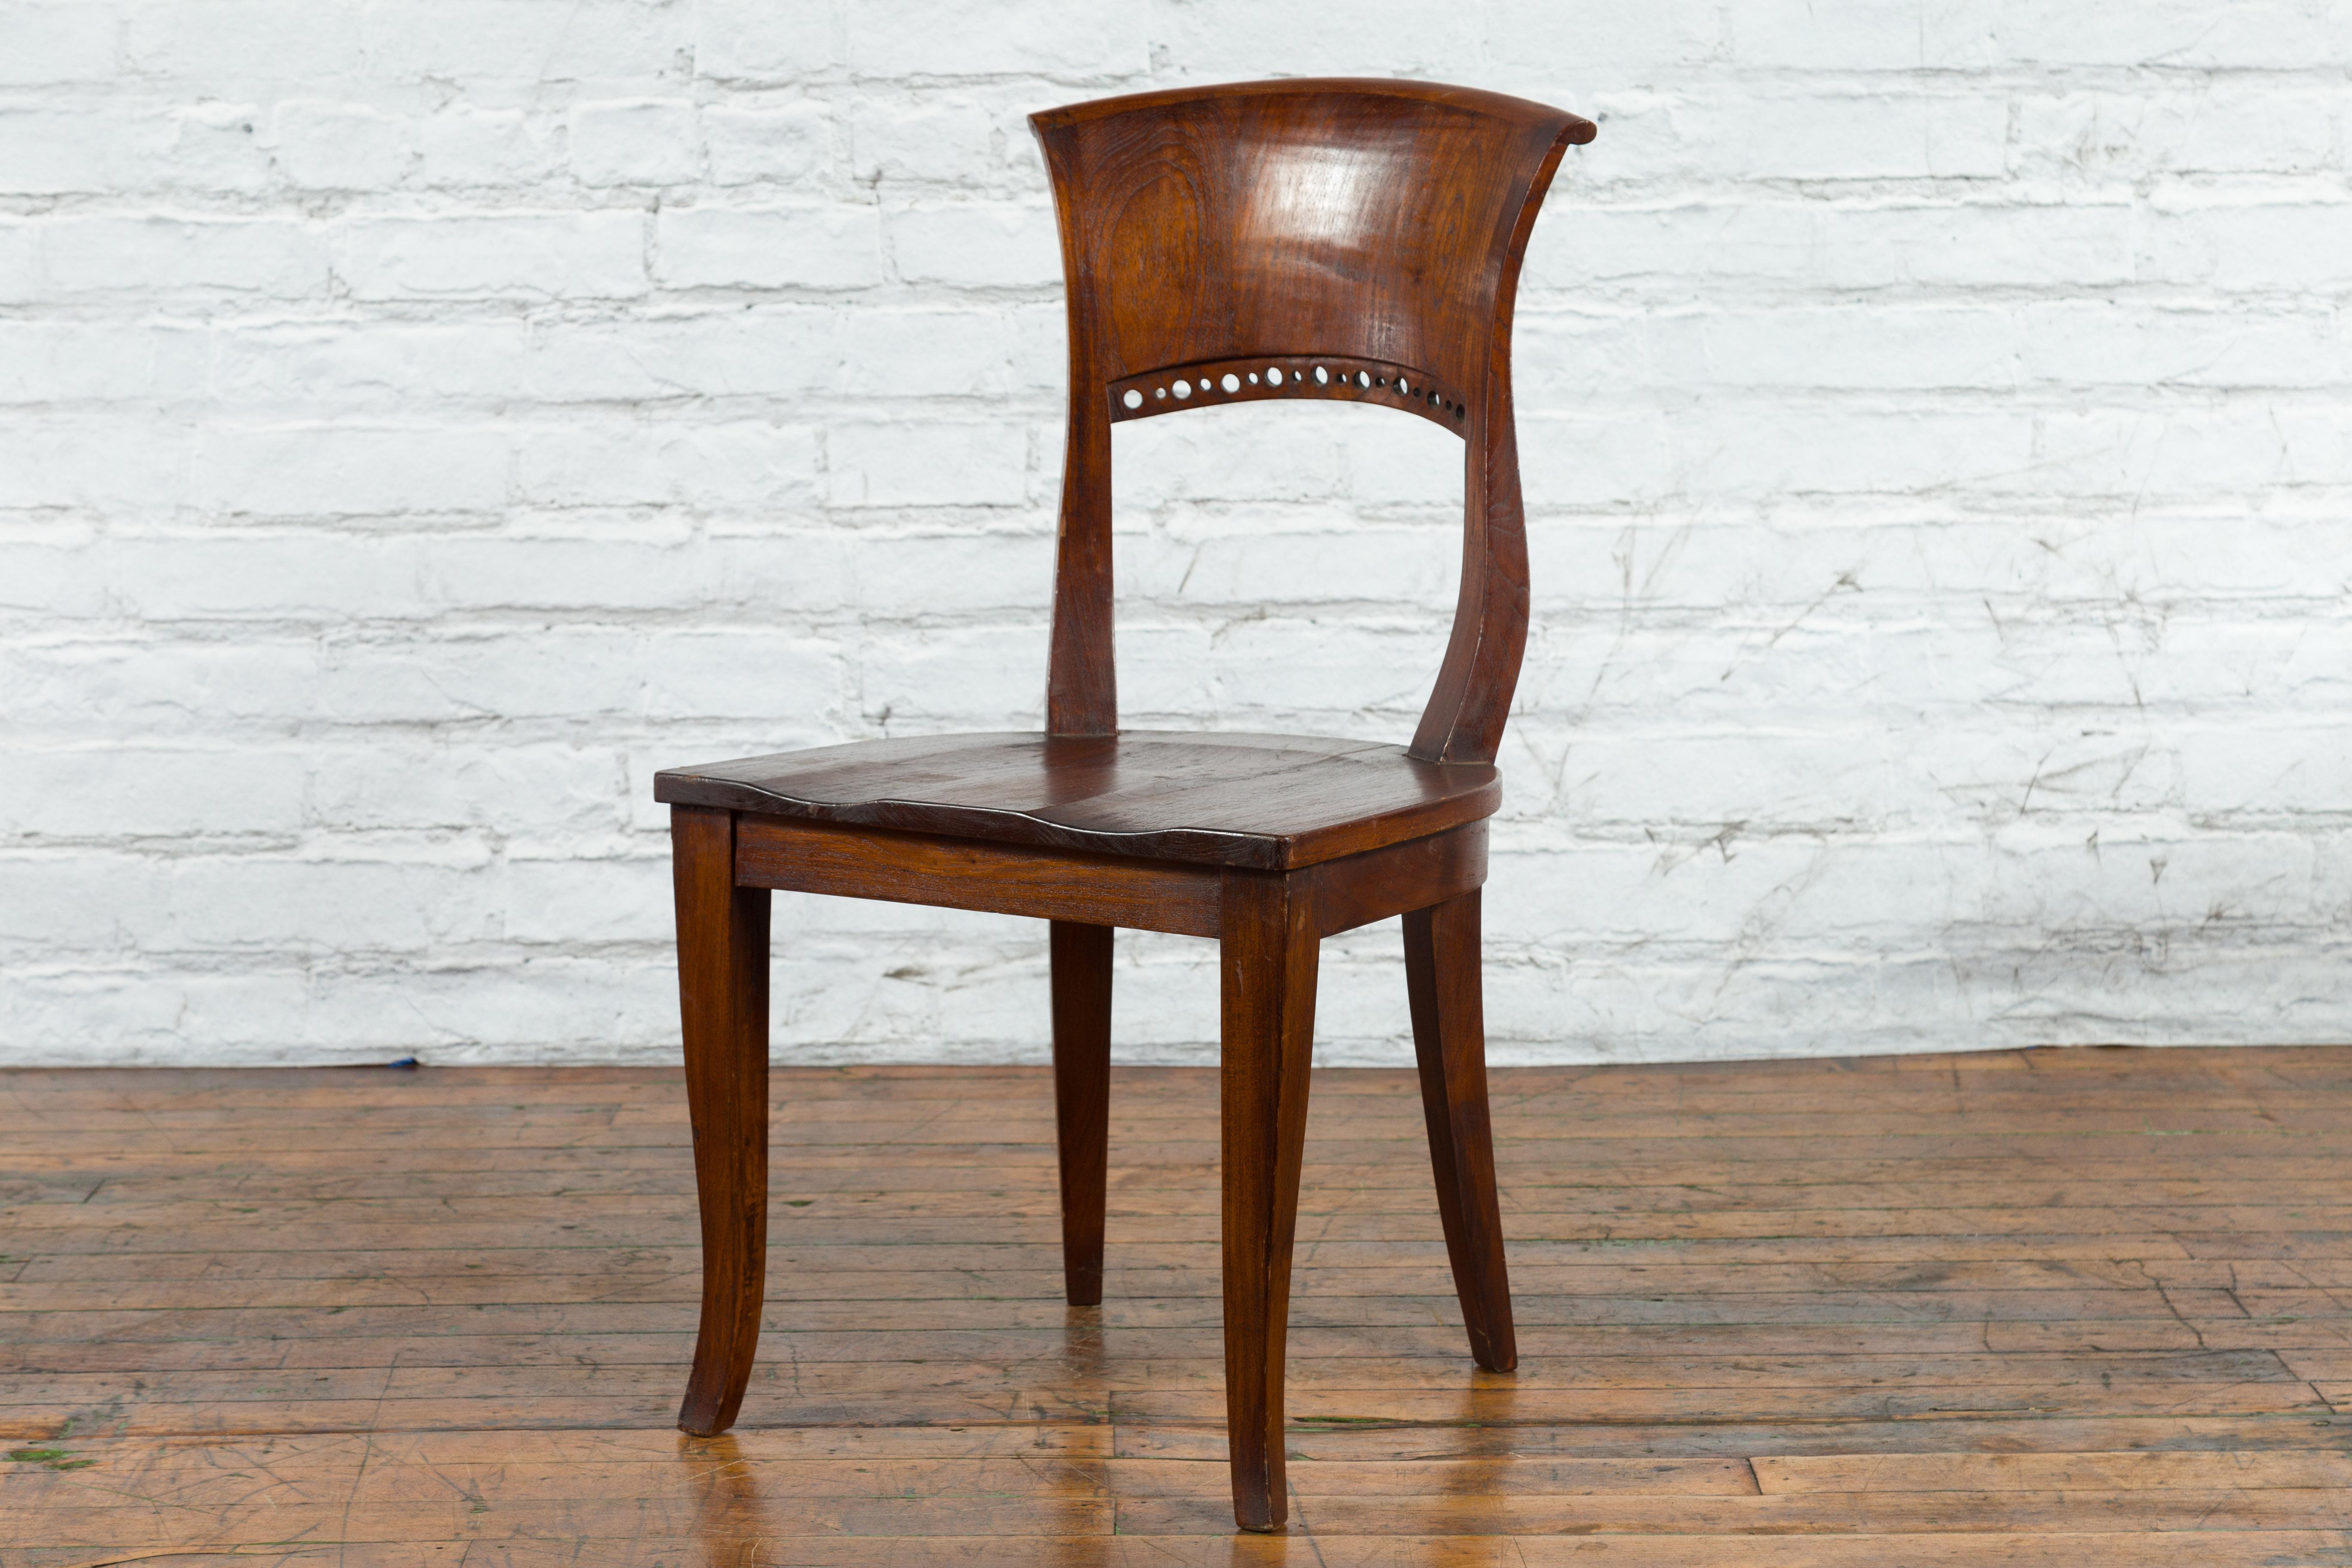 Vintage Indonesia Wooden Accent Chair with Pierced Circular Motifs Curving Back For Sale 4